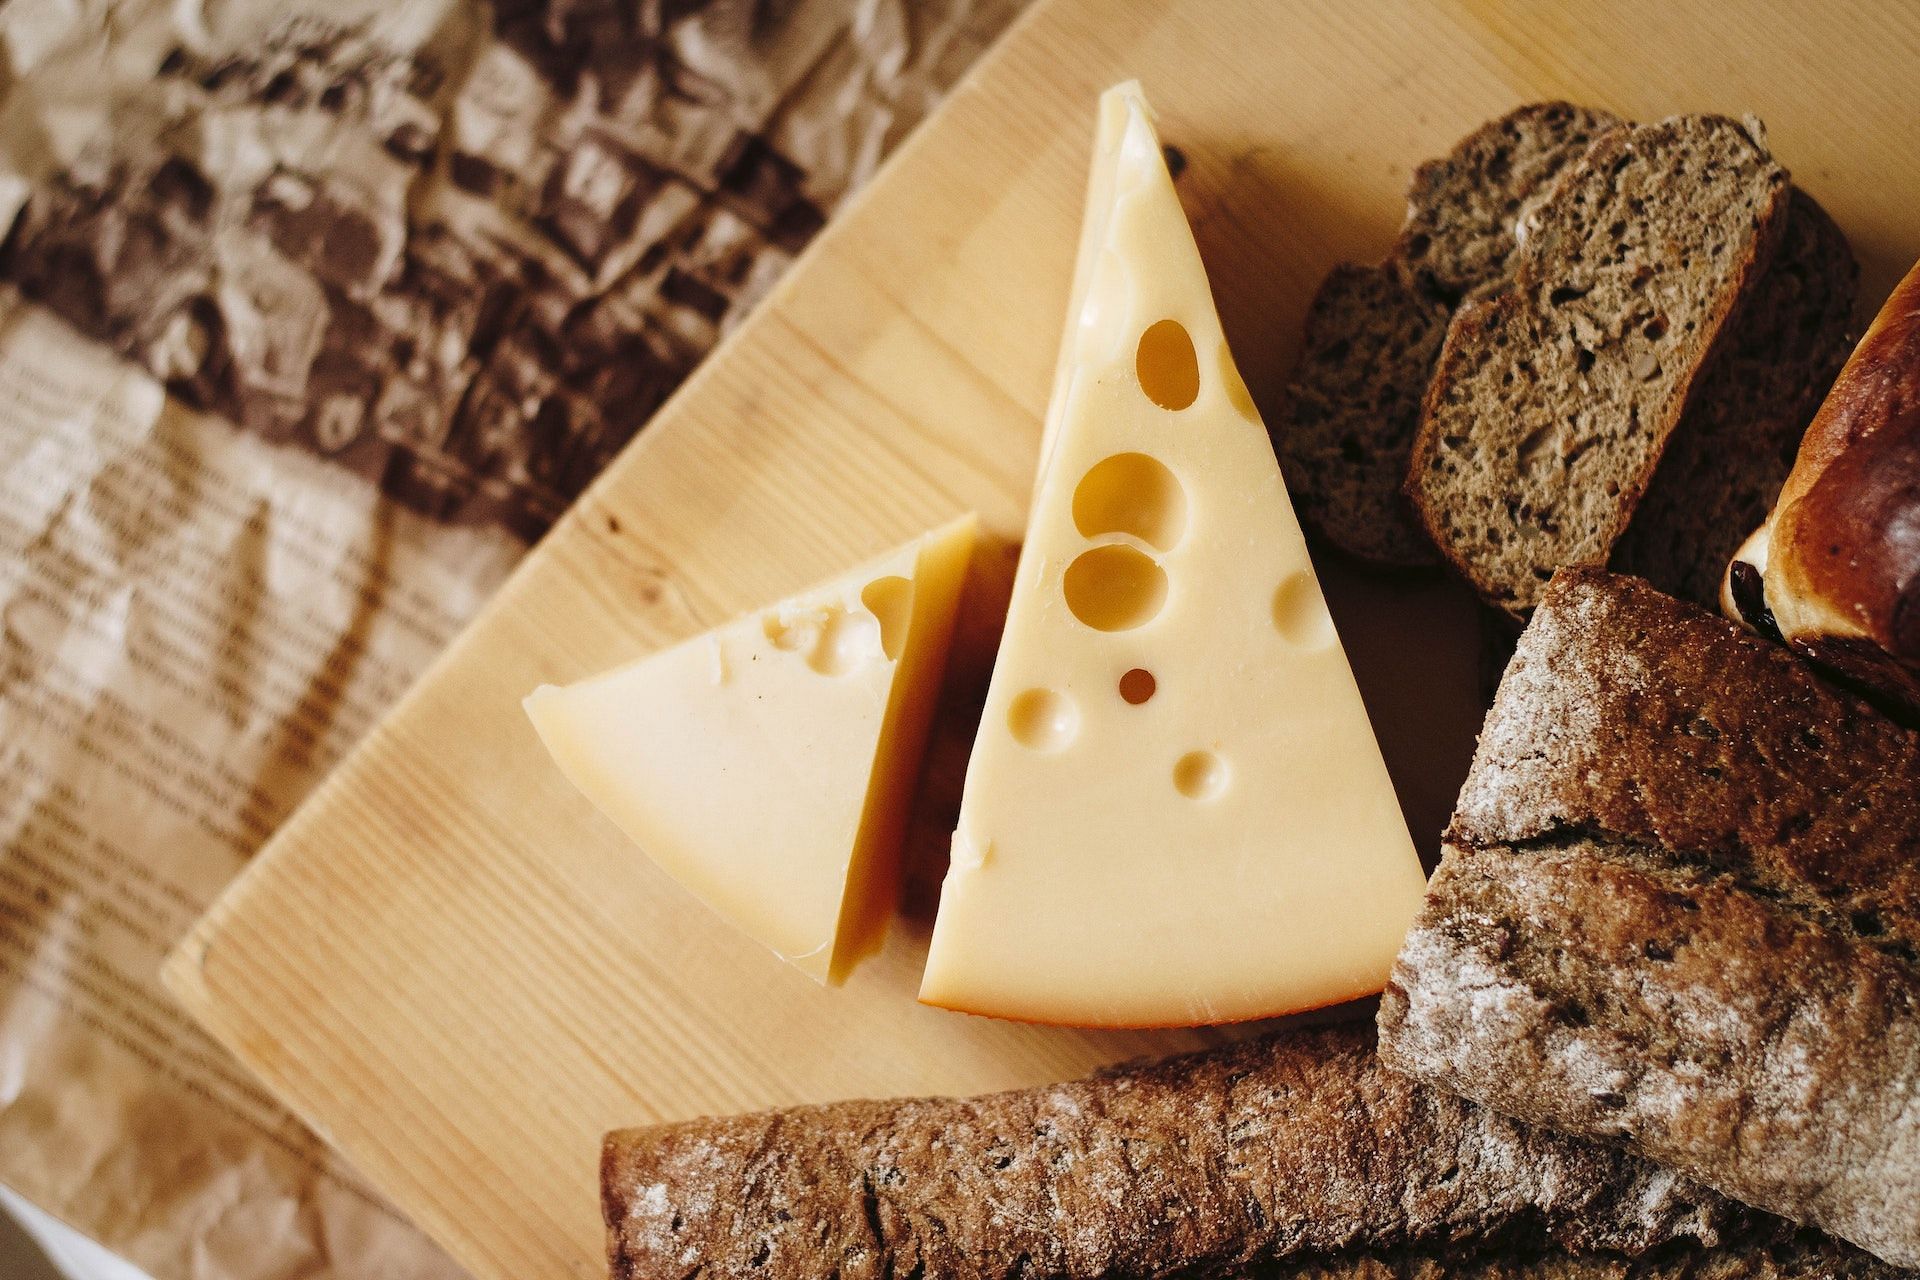 Dairy items, such as cheese should be added to a hypothyroidism diet. (Photo via Pexels/NastyaSensei)